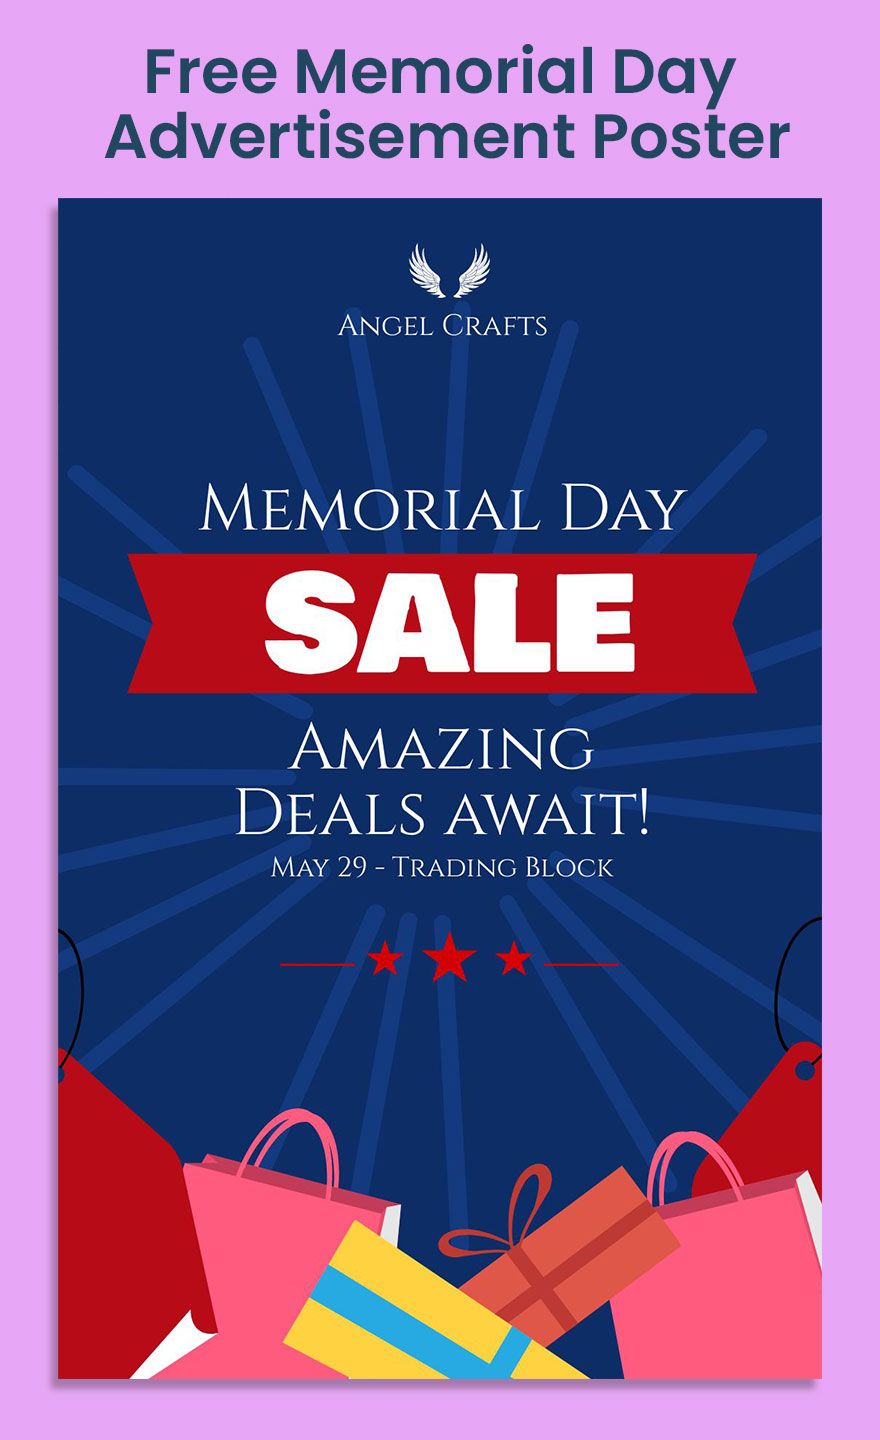 Free Memorial Day Advertisement Poster